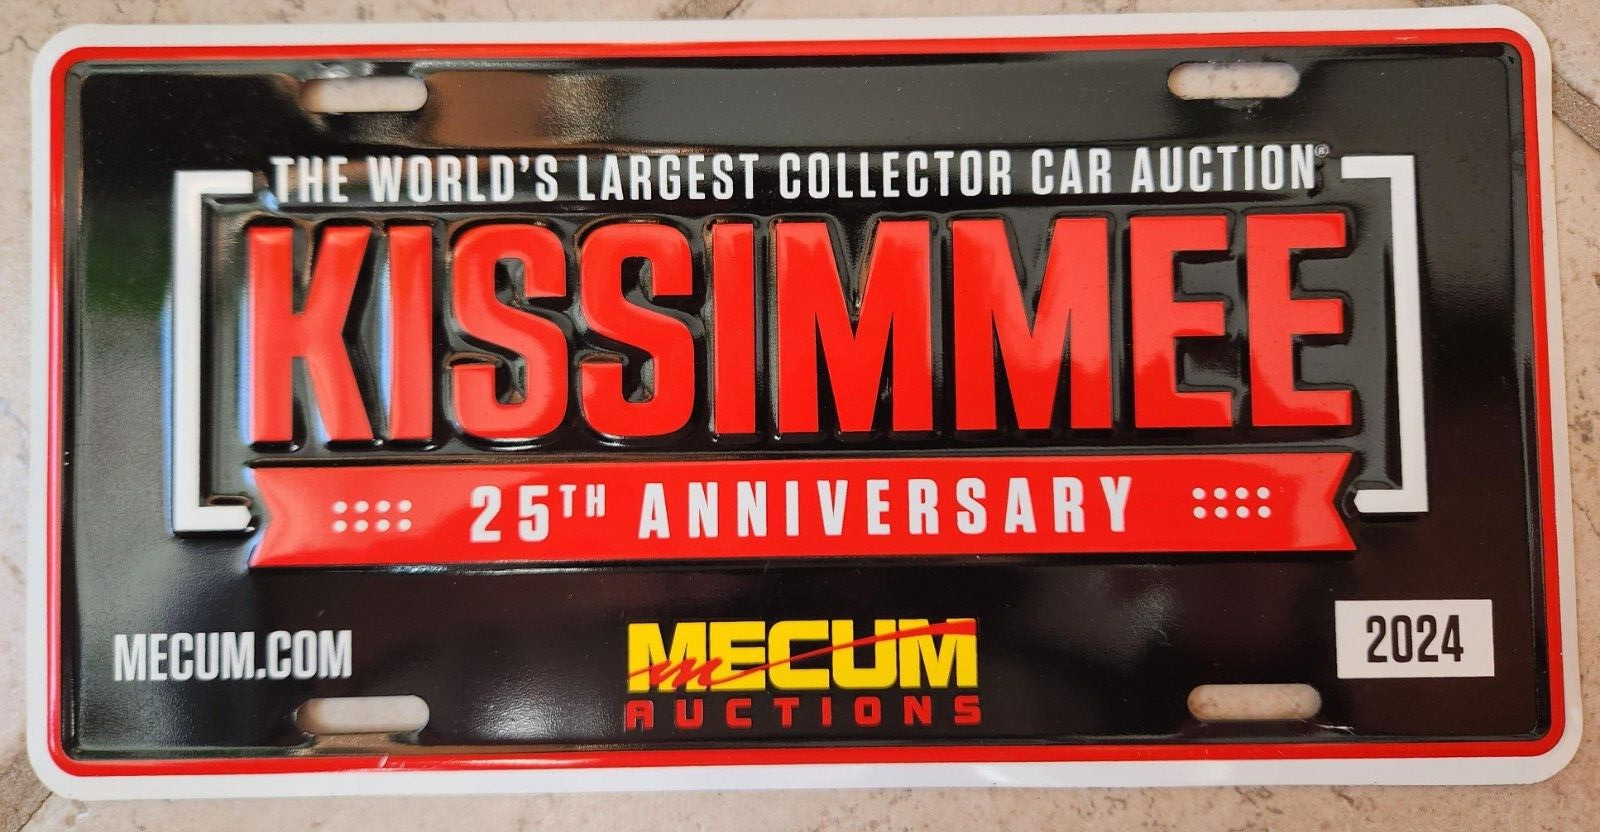 Mecum Auctions KISSIMMEE 25th ANNIVERSARY License Plate